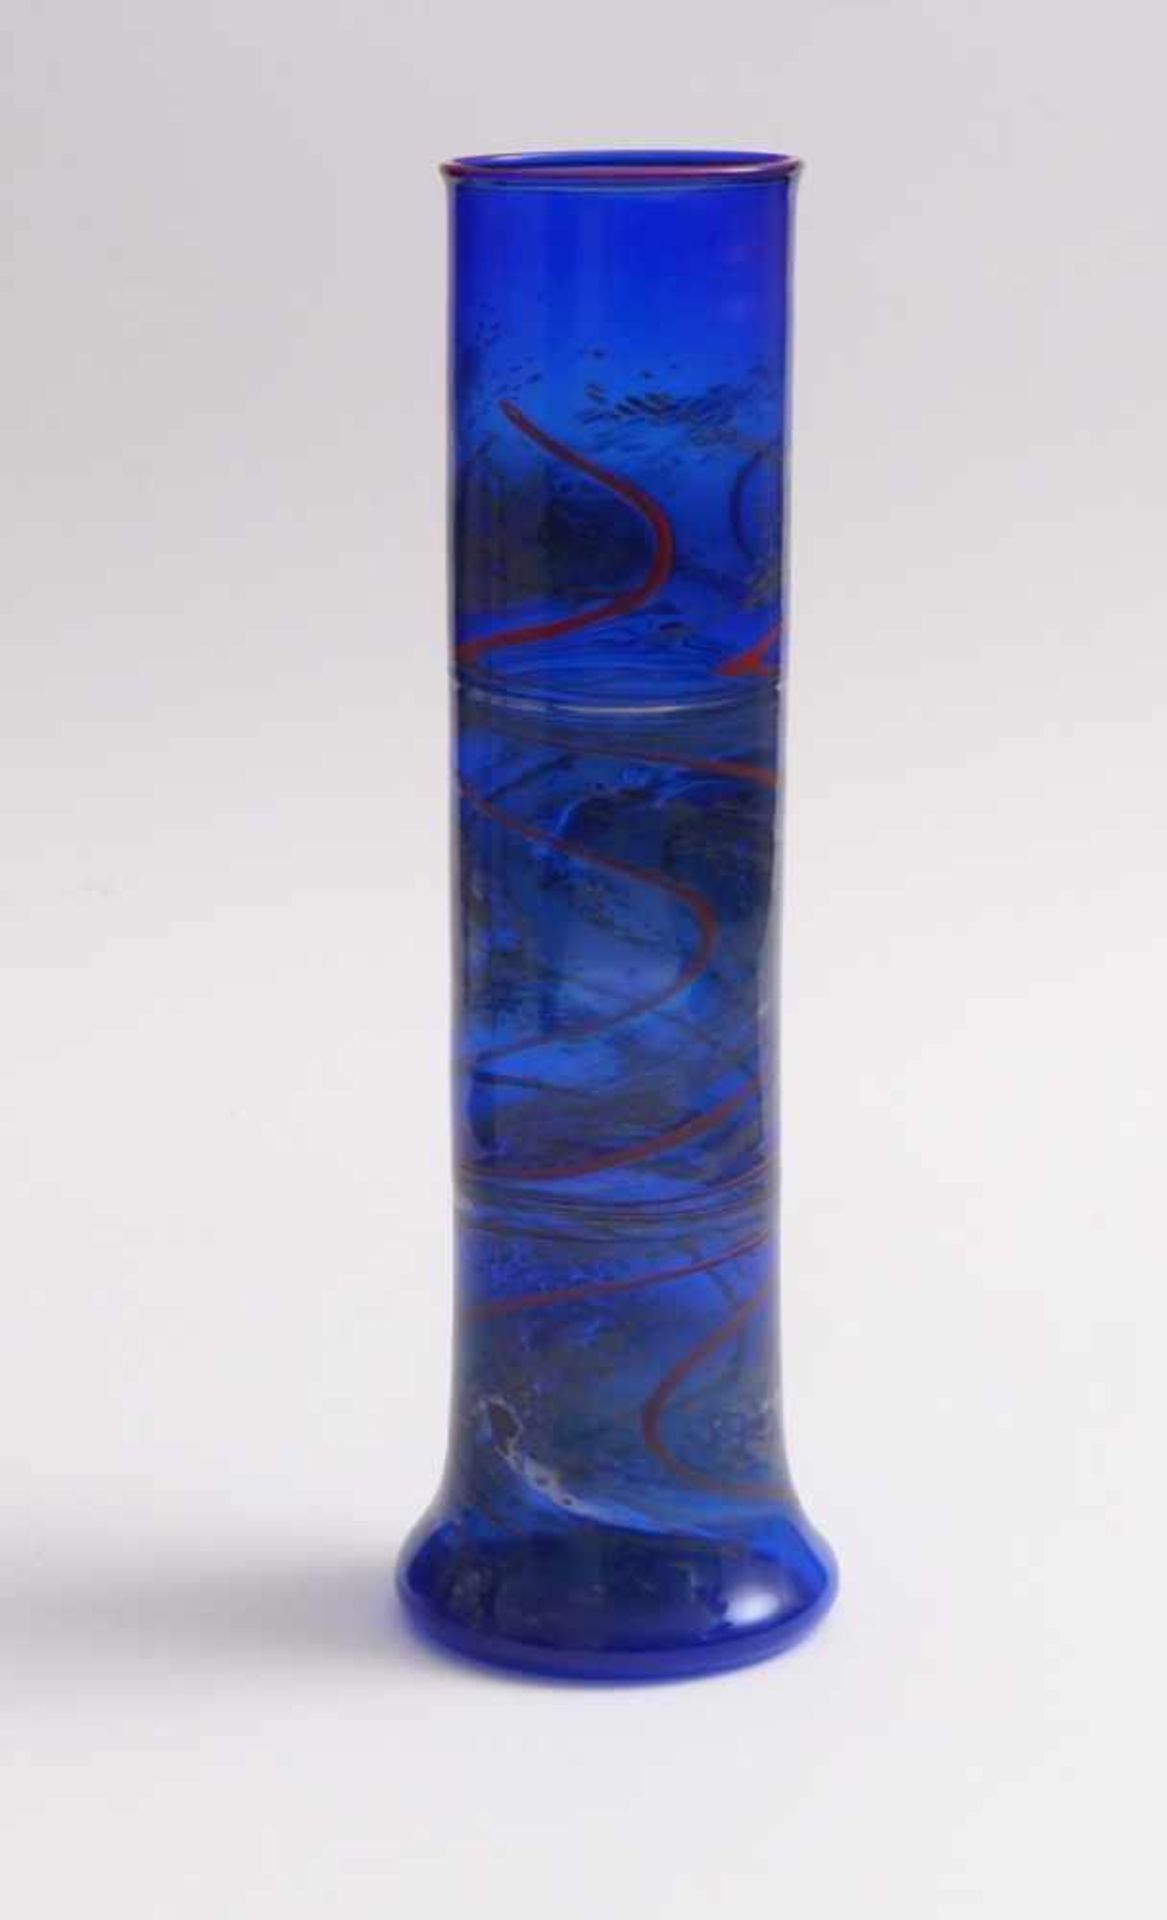 Bäz-Dölle, WalterVase(Lauscha 1935 born) Cobalt blue glass with wavy red threads and metal oxide - Image 2 of 2